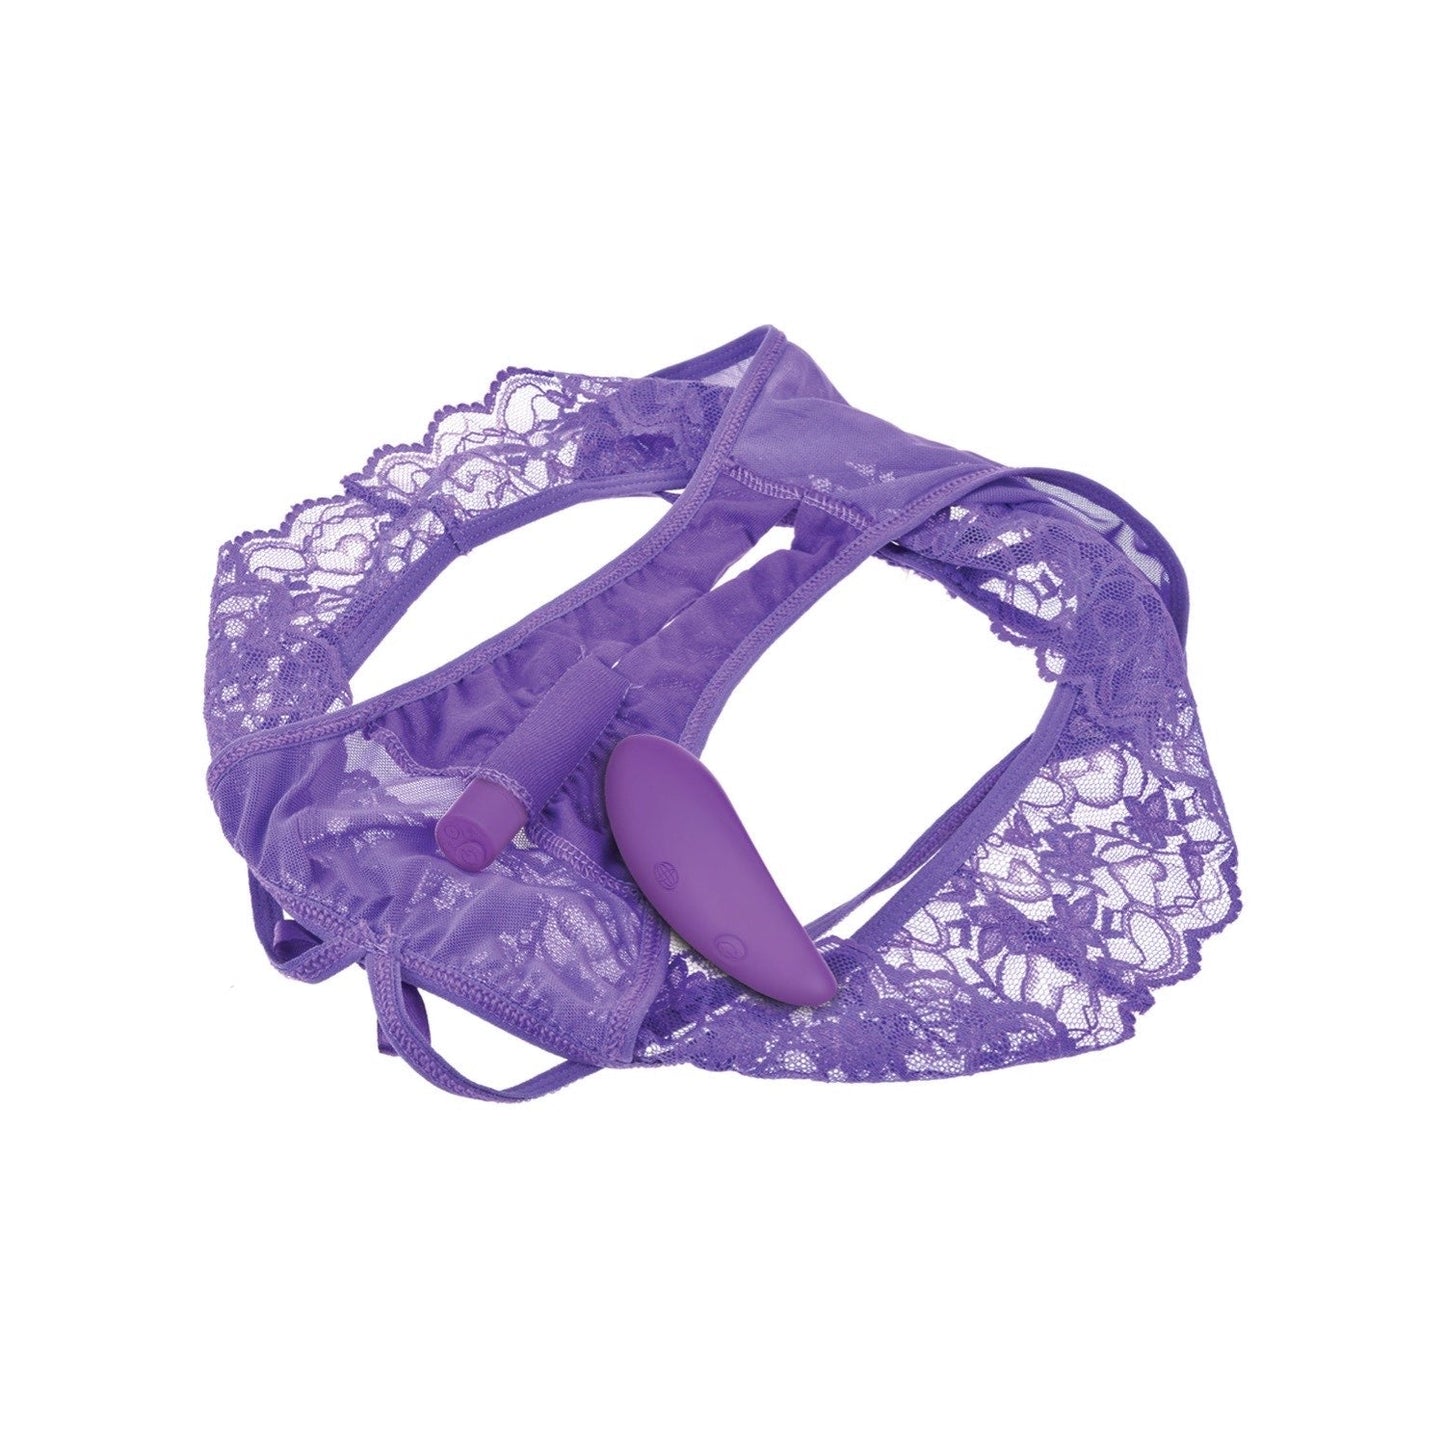 Crotchless Panty Thrill-Her - Purple Vibrating Panties with Wireless Remote